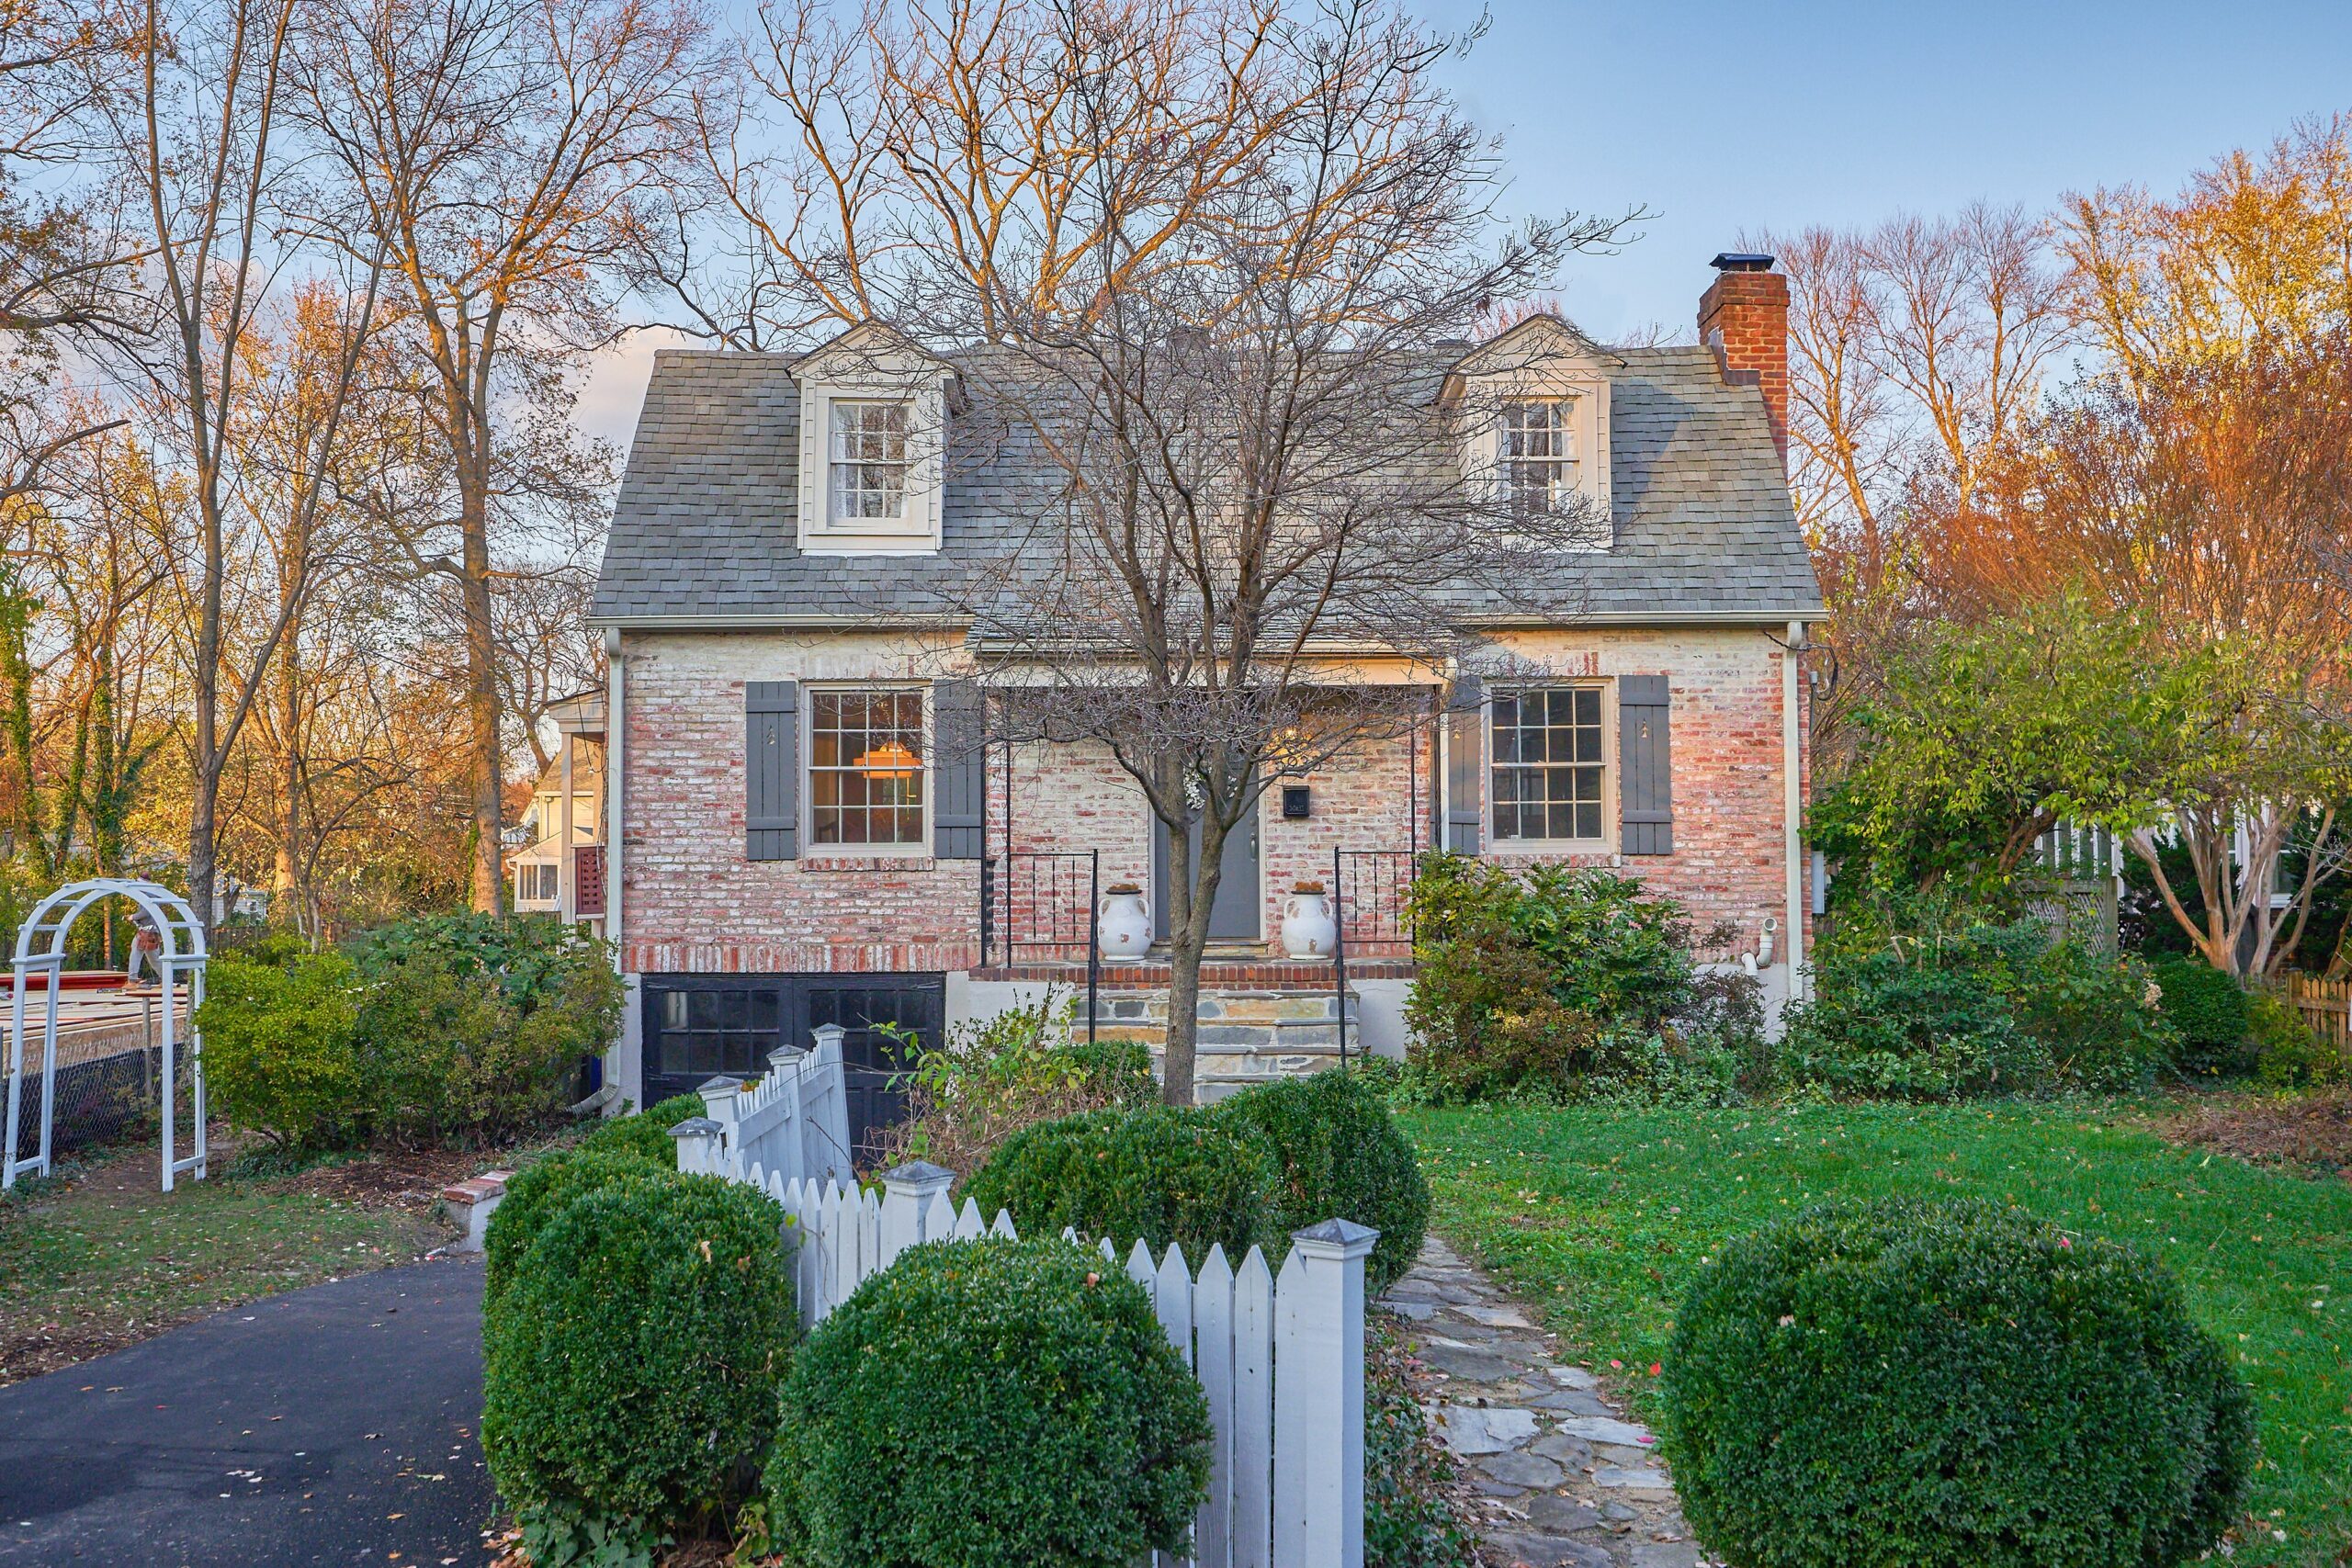 Professional exterior photo of 5933 16th St N, Arlington, VA - showing the front. Home is a white washed red brick Cape Cod with grey shingle roof and stone front steps. A stone pathway leads from the road straight to the steps.